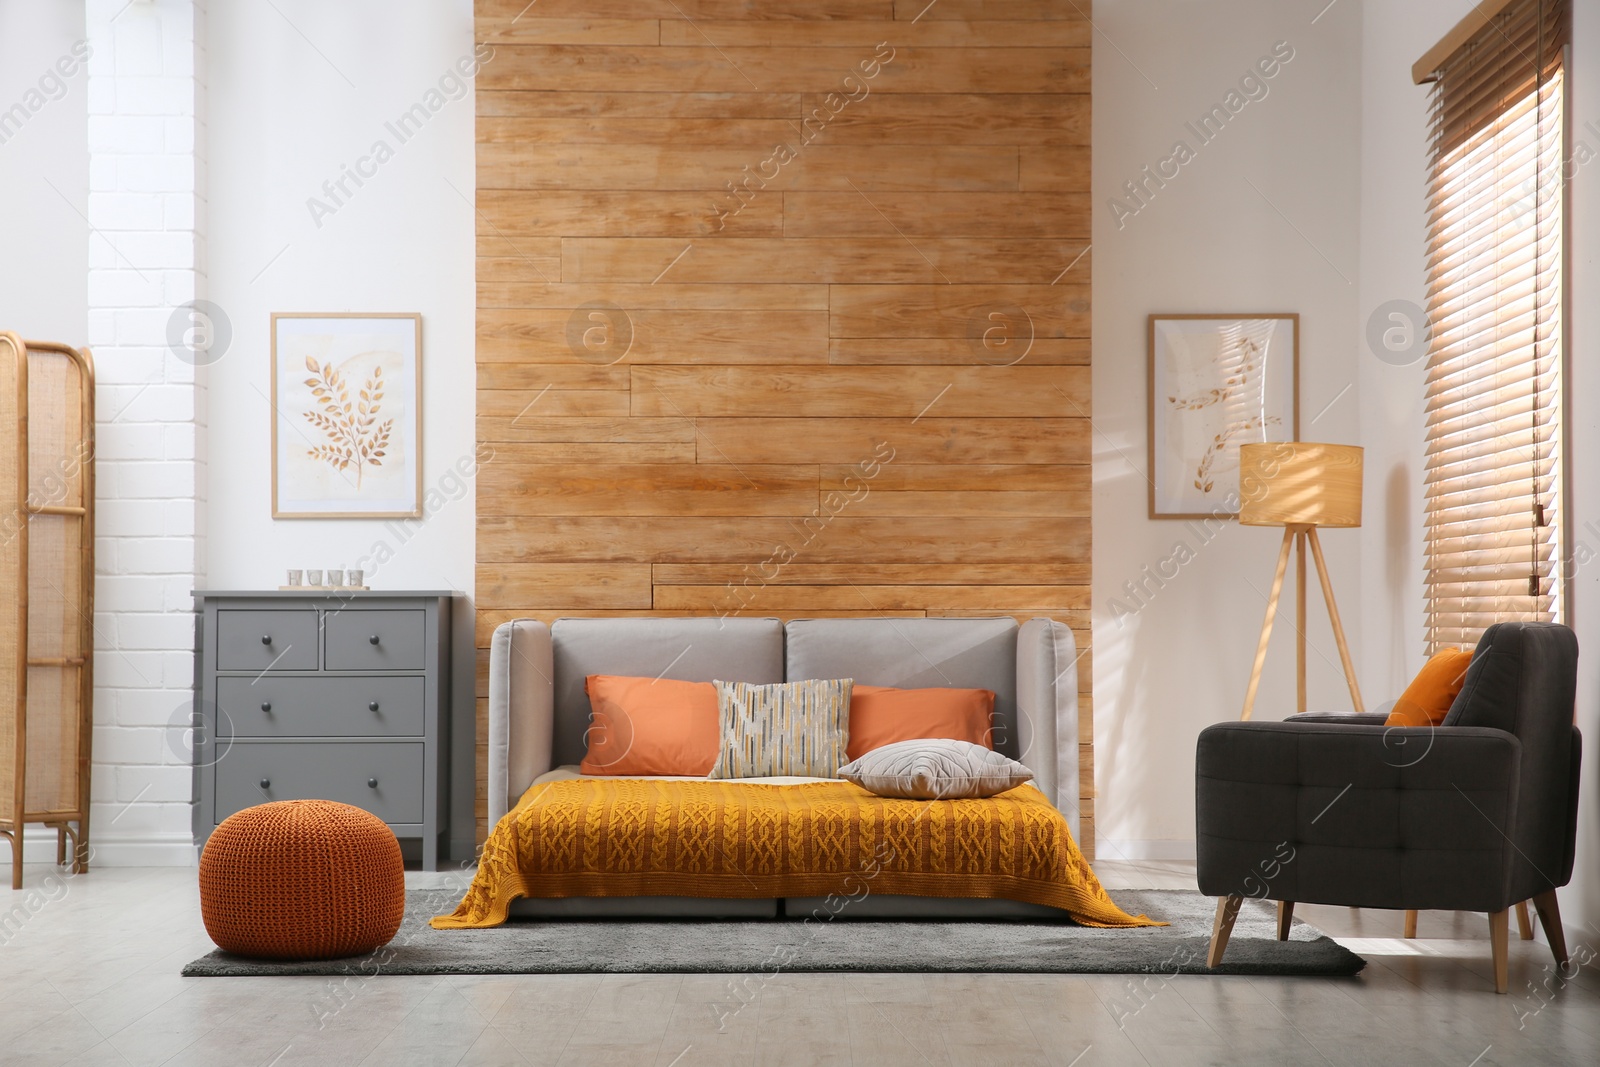 Photo of Room interior with sofa unfolded into bed near wooden wall